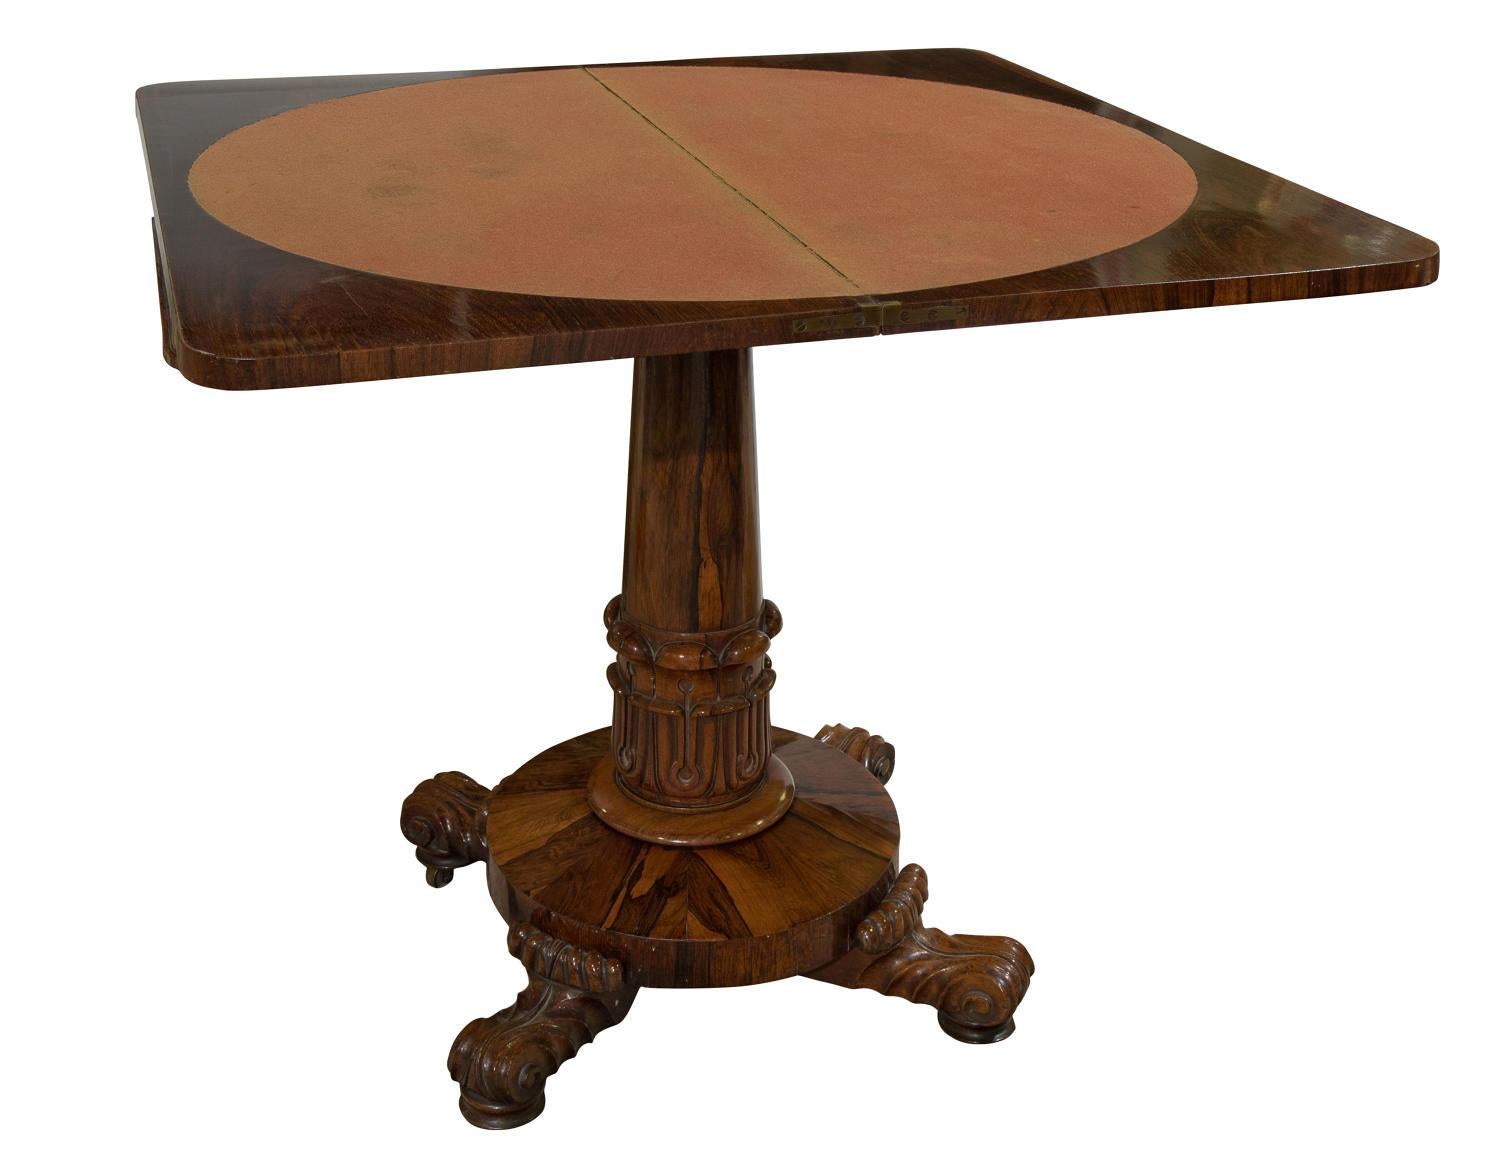 A William IV Rosewood card table standing on a central pedestal and carved base.

Circa 1830